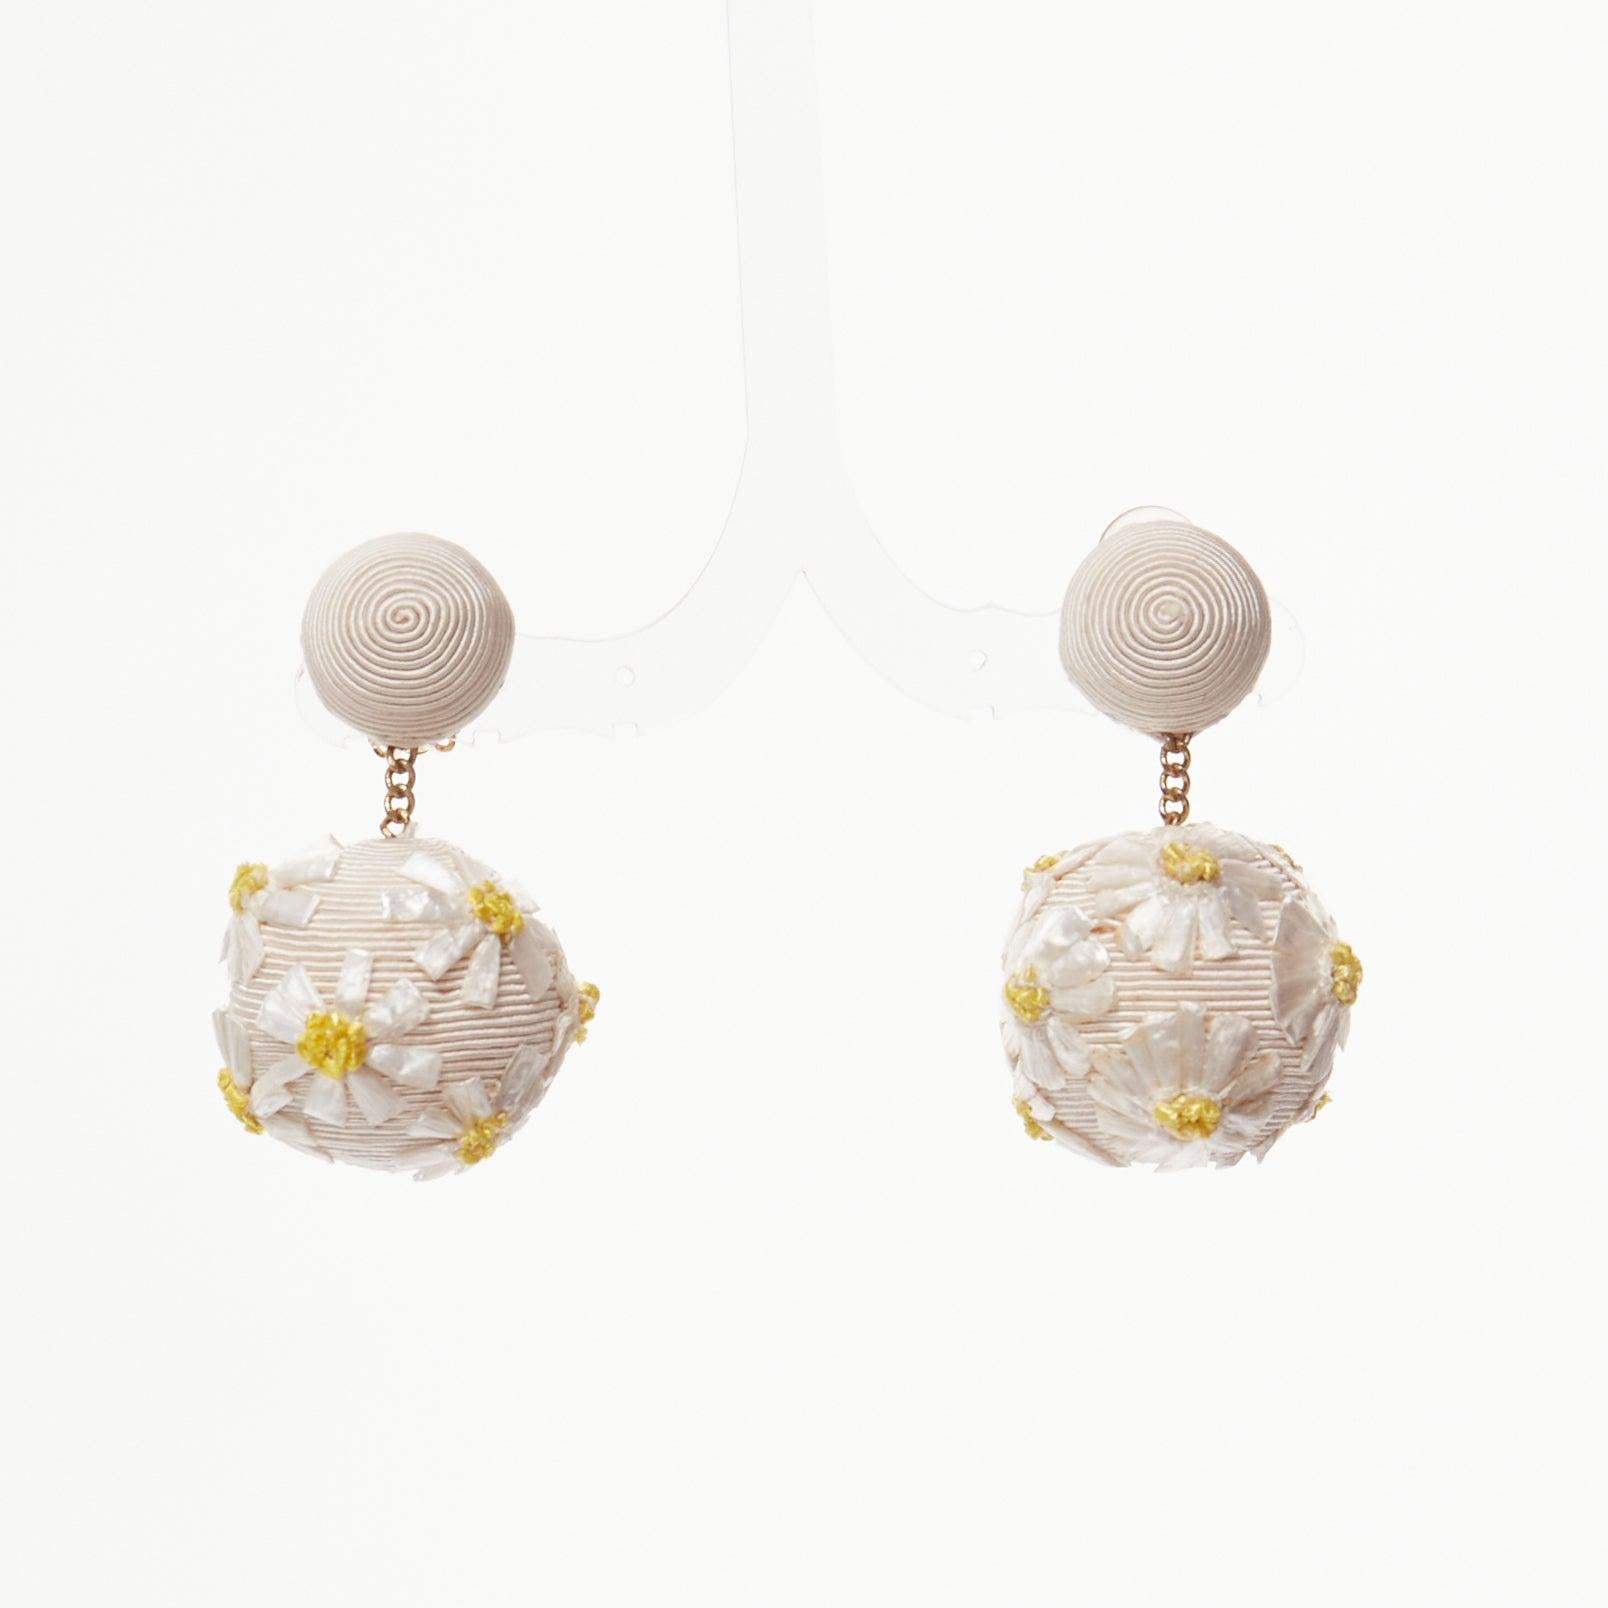 REBECCA DE RAVENEL cream yellow daisy applique clip on drop earrings
Reference: AAWC/A01240
Brand: Rebecca De Ravenel
Material: Fabric
Color: Cream, Yellow
Pattern: Floral
Closure: Clip On
Lining: Gold Metal

CONDITION:
Condition: Excellent, this